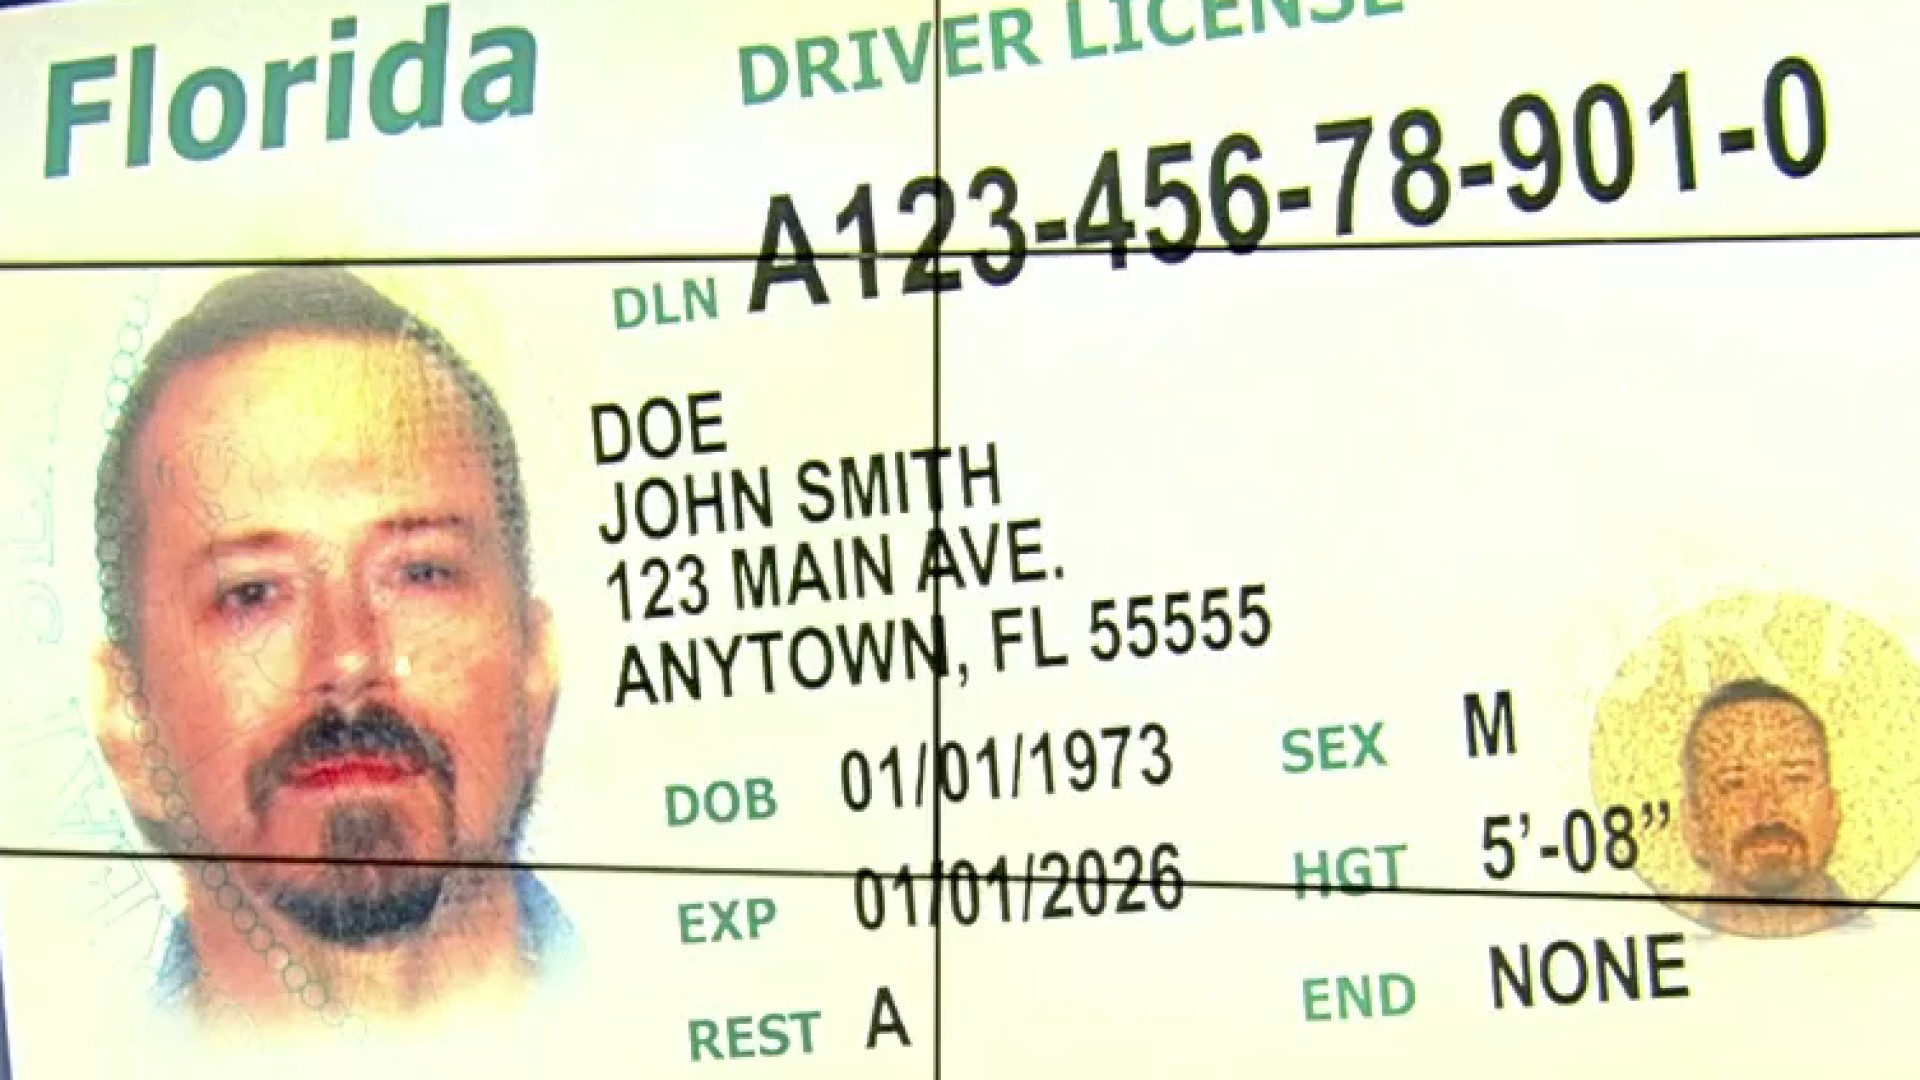 Here's how long you have to get a Florida driver's license after